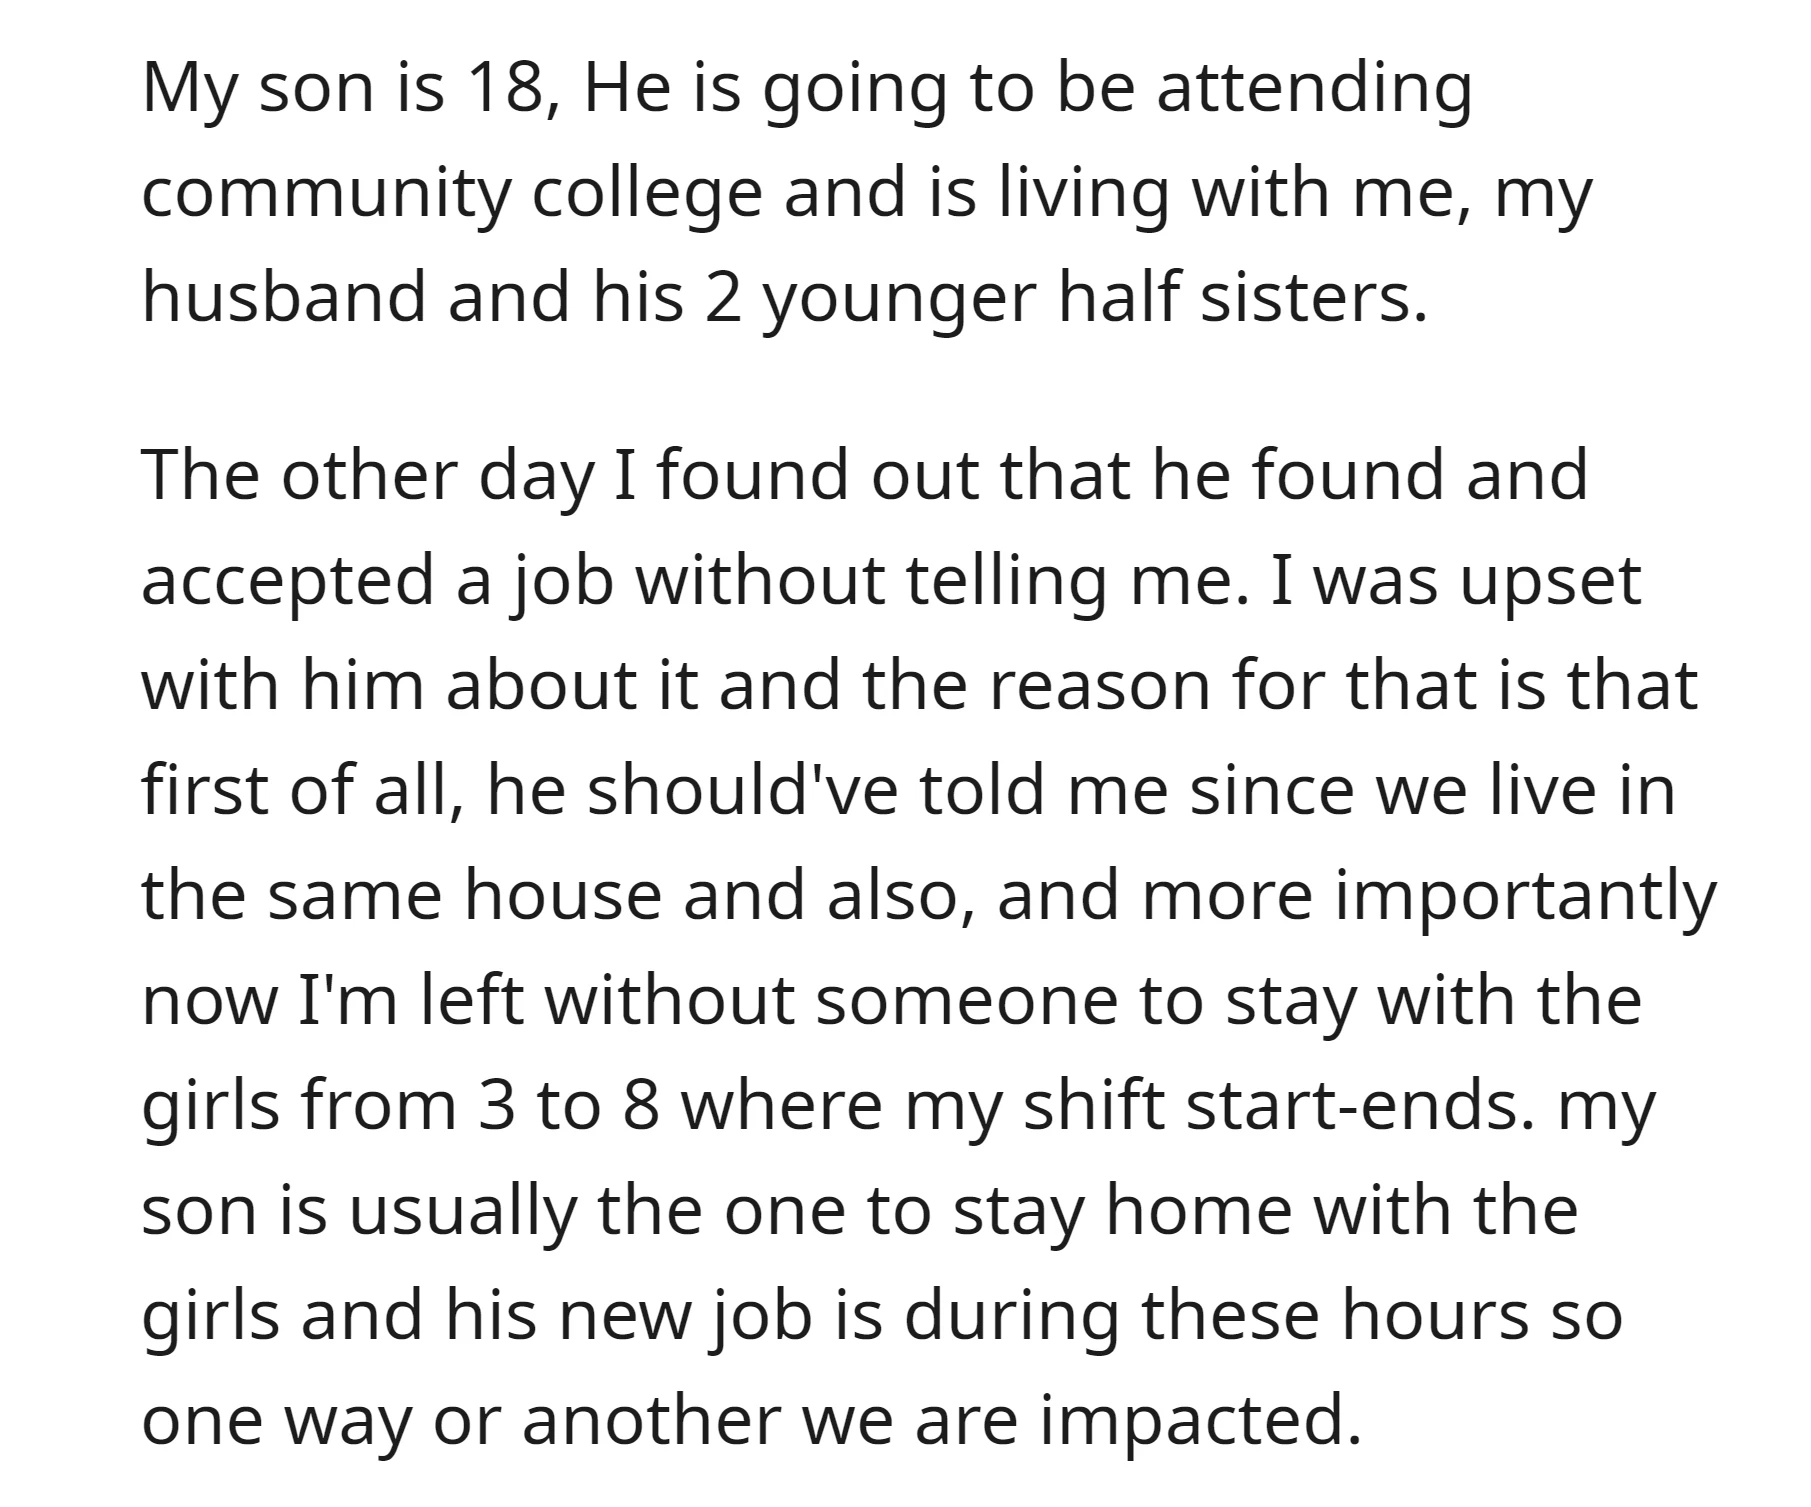 OP's son frequently assists in caring for his younger half-sisters but recently got a job without informing them